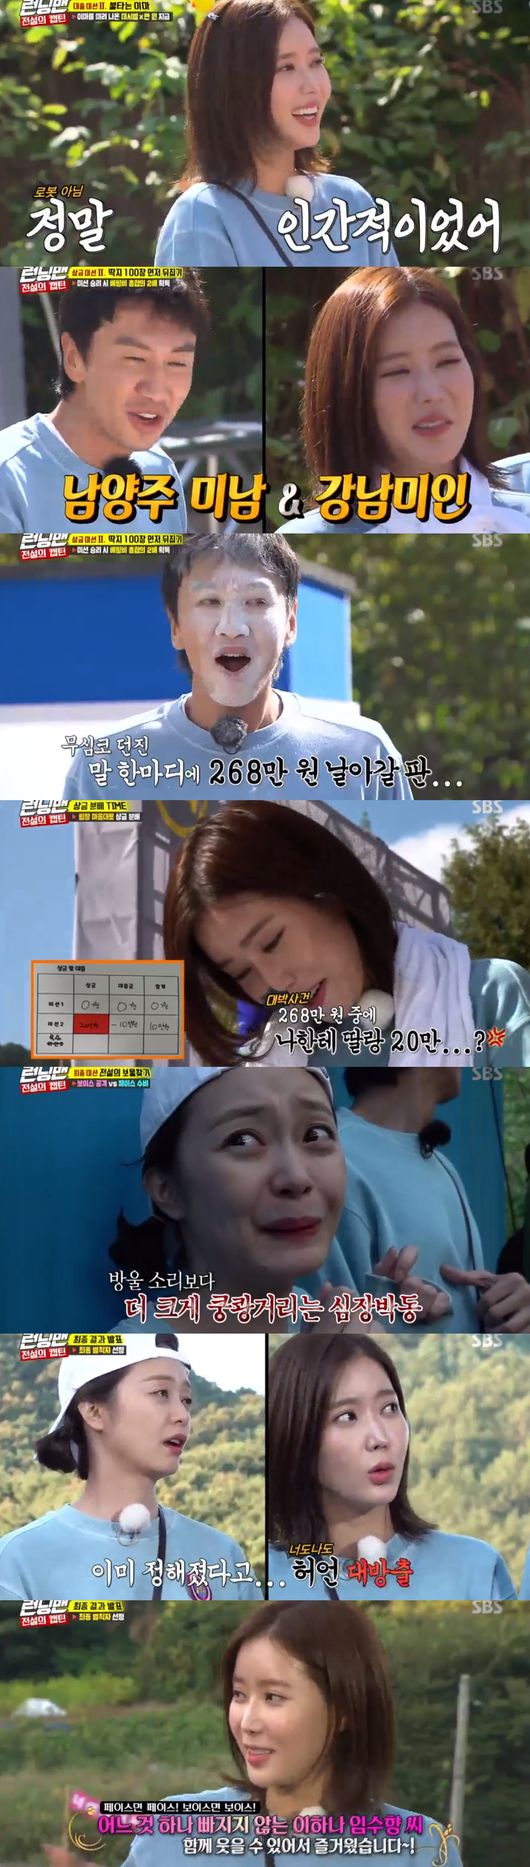 Im Soo-hyang put everything down in Running Man 2 appearance until PSY dance rap break.On the 14th airwave SBS Good Sunday - Running Man, Im Soo-hyang appeared in the capacity of Captain America: Civil War with Lee Ha-na.Lee Ha-na, who was greatly loved by JTBCs My ID is Gangnam District Beauty, Im Soo-hyang for the Babyface team, OCN Voice 2, was the Captain America: Civil War for the Voice team.Im Soo-hyang is the second Running Man appearance since 2012; he grew up winning by playing a couple game with Yoo Jae-Suk when he first appeared.Members applauded Im Soo-hyang, who returned to the rookie after six years as a star.Im Soo-hyang shrugged, saying, My ID is a Gangnam District beauty.Im Soo-hyangs anti-war charm was full with Lee Ha-na.In the rap-penetrating game, Im Soo-hyang was also destroyed, but lost to Lee Ha-na.However, in the sleeping bag railway karaoke 999 Game, as soon as I heard the lyrics, I surprised the team members by hitting PSYs New Babyface.Of course, this game was also lost by the Babyface team.The sunny one was the attraction point of Im Soo-hyang.Captain America: As a Civil War, the team would lose and be angry, but Im Soo-hyang smiled even if the team members fell and smiled.Rather, they enjoyed music and danced in full swing, making them happy to see their own mood.The breathing of Im Soo-hyang and Yoo Jae-Suk, Lee Kwang-soo, Jeon So-min and Ji Suk-jin was amazing.The Im Soo-hyang team touted in the flour puck and legendary treasure hunt Race.Im Soo-hyang was in the mood of autumn, enjoying the atmosphere of the park without any hesitation during the intense race.Under the bottom, the team members are keen to remove the name tag, and Im Soo-hyang, who knows whether or not he knows it, was a laughing point for viewers.Im Soo-hyang is often misunderstood as a polished figure because his first starring film, The God Parasitism, was so intense and the villain image was so great.But Im Soo-hyang is, as it turns out, a bald actress, whose charm he saw in Running Man was properly unravelled.Running Man